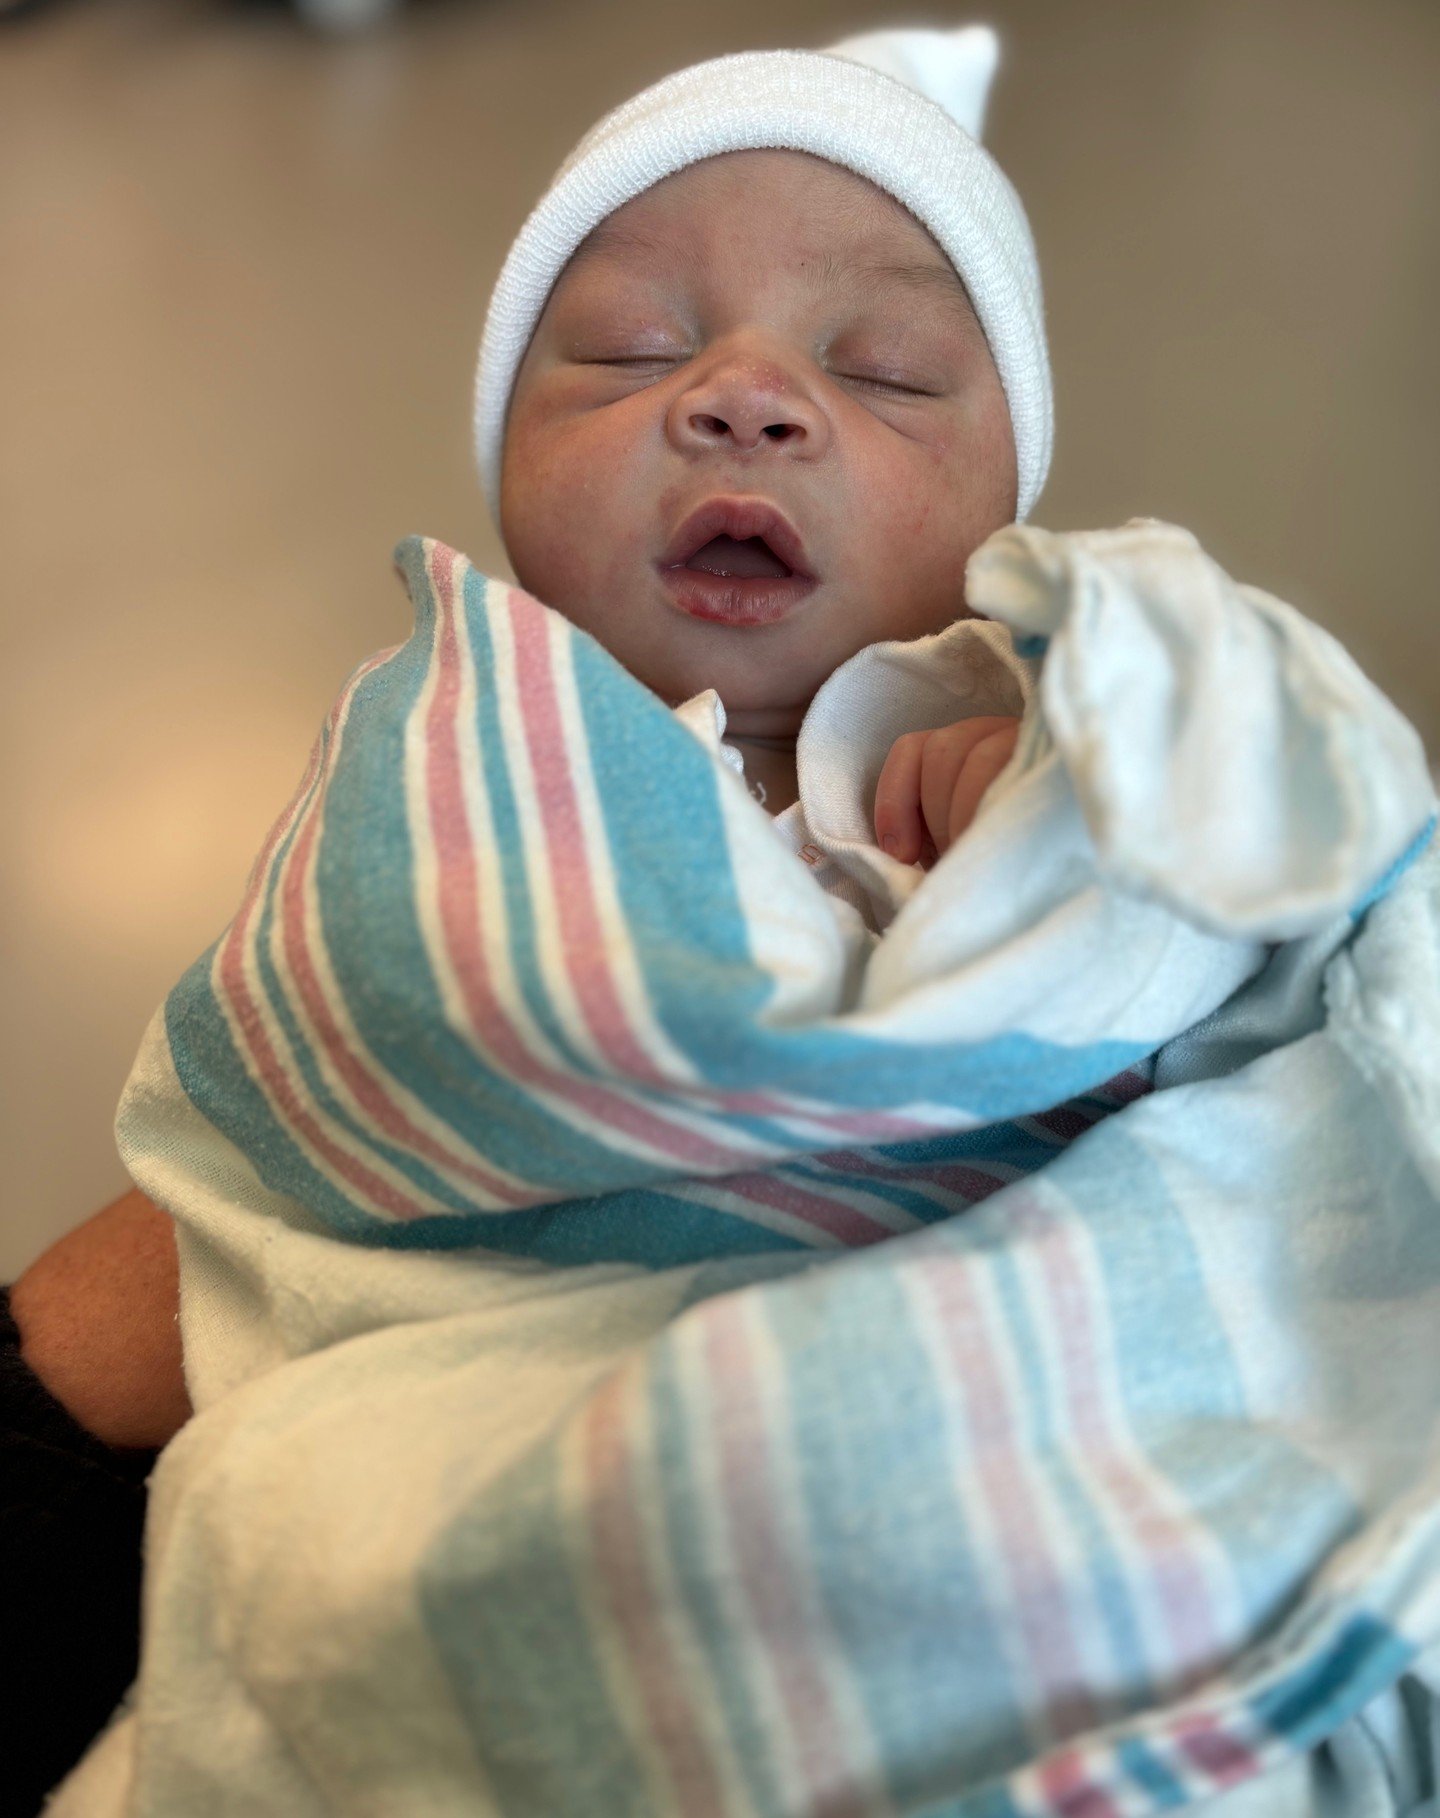 Remember the smiling face we shared last week? That&rsquo;s Agnes. Now meet her baby boy, Malachi!

In February we started providing childbirth education classes in a metro jail. We met Agnes, who discovered she was pregnant when she was already 7.5 